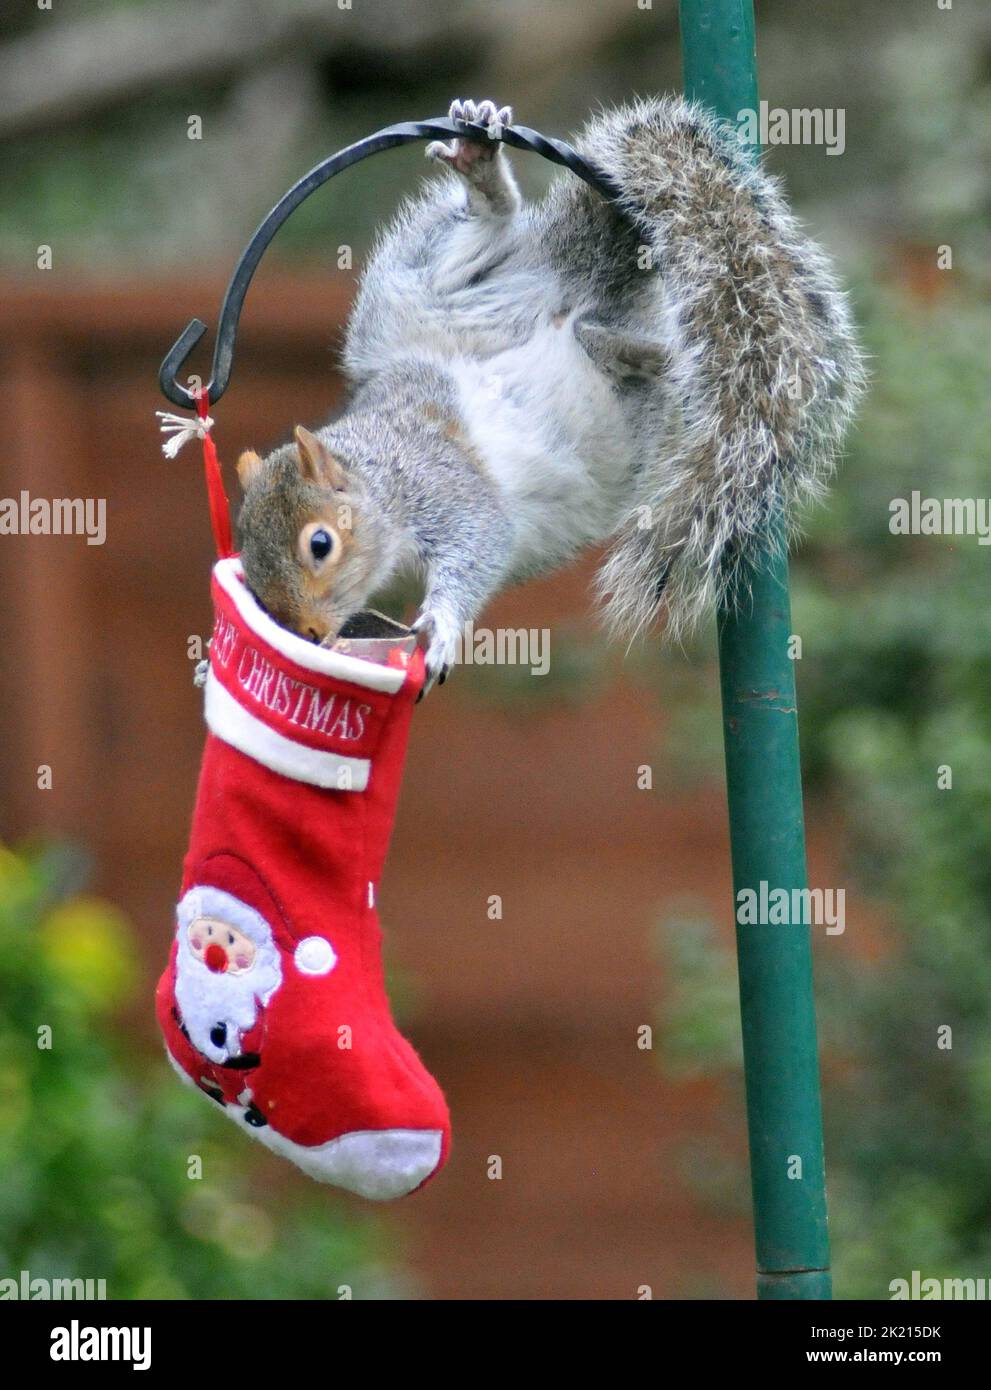 A grey squirrel goes nuts for the treats in his Christmas stocking which has been hung out on the bird feeder of nature lover Sue Perring from Purbrook in Hampshire.  Although the goodies are not easy to get at this resourceful rodent grapples with the swinging stocking until it finally manages to get his head inside to get his present... juicy nuts covered in peanut butter.  39 year old Tax consultant Sue, who feeds the birds and squirrels all year round said :''I thought I would  have a bit of fun with the pesky little creatures by hiding some special treats of walnuts and hazel nuts coated Stock Photo